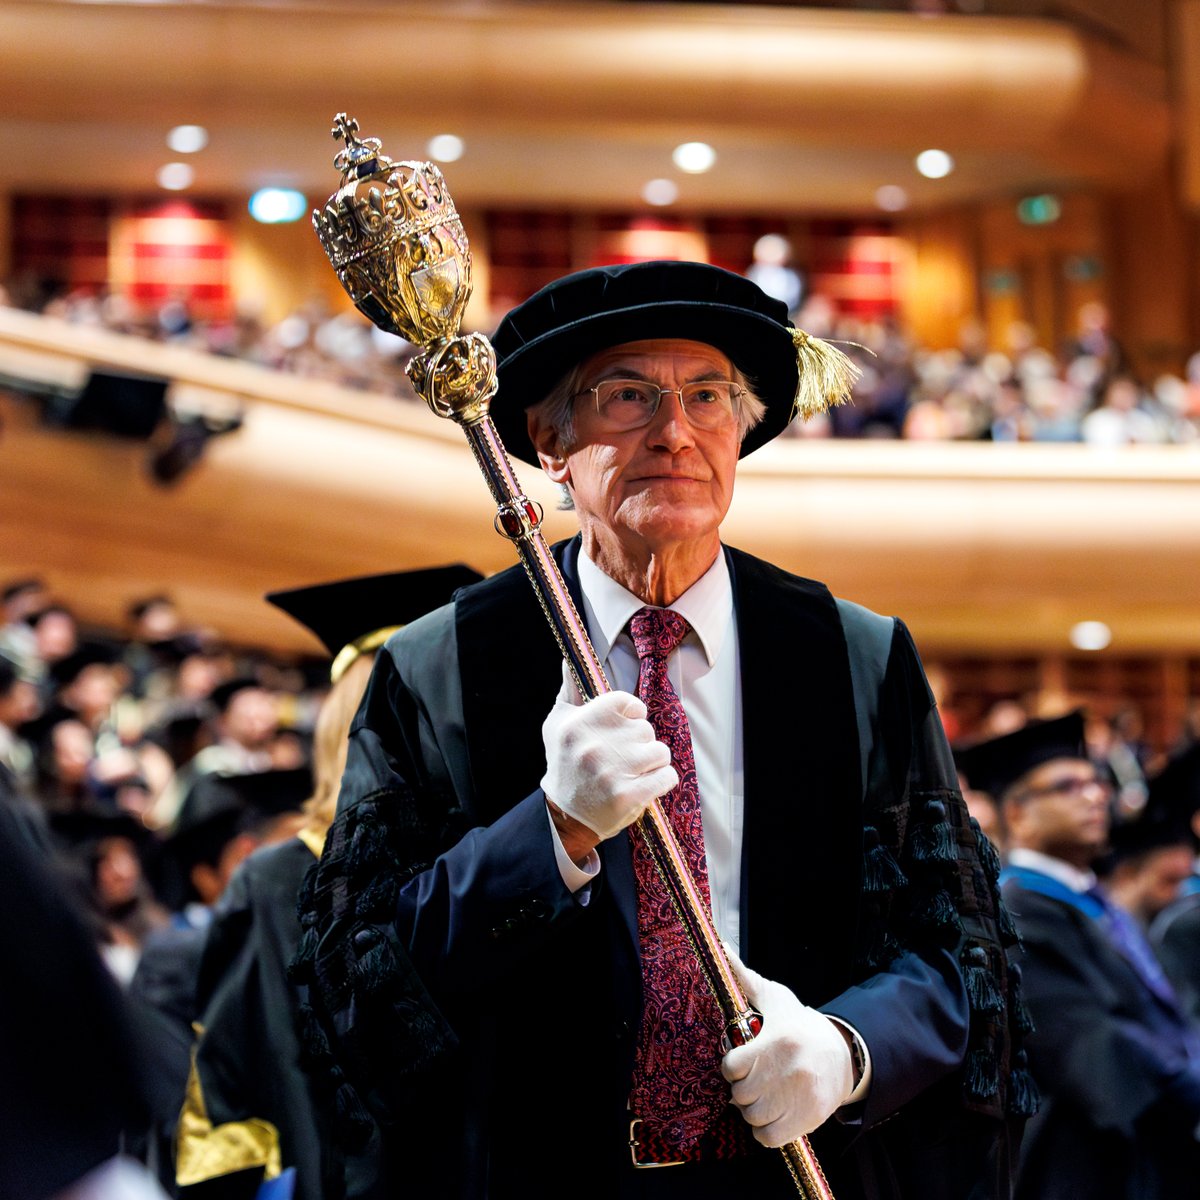 We are delighted to share an early preview of the official photos taken at University of London Graduation 2024 🎓 Browse our carousel and relive some of the best moments from our 2024 graduation ceremonies. Congratulations to our new graduates! 📸 - Alex Rumford #UoLGrad2024